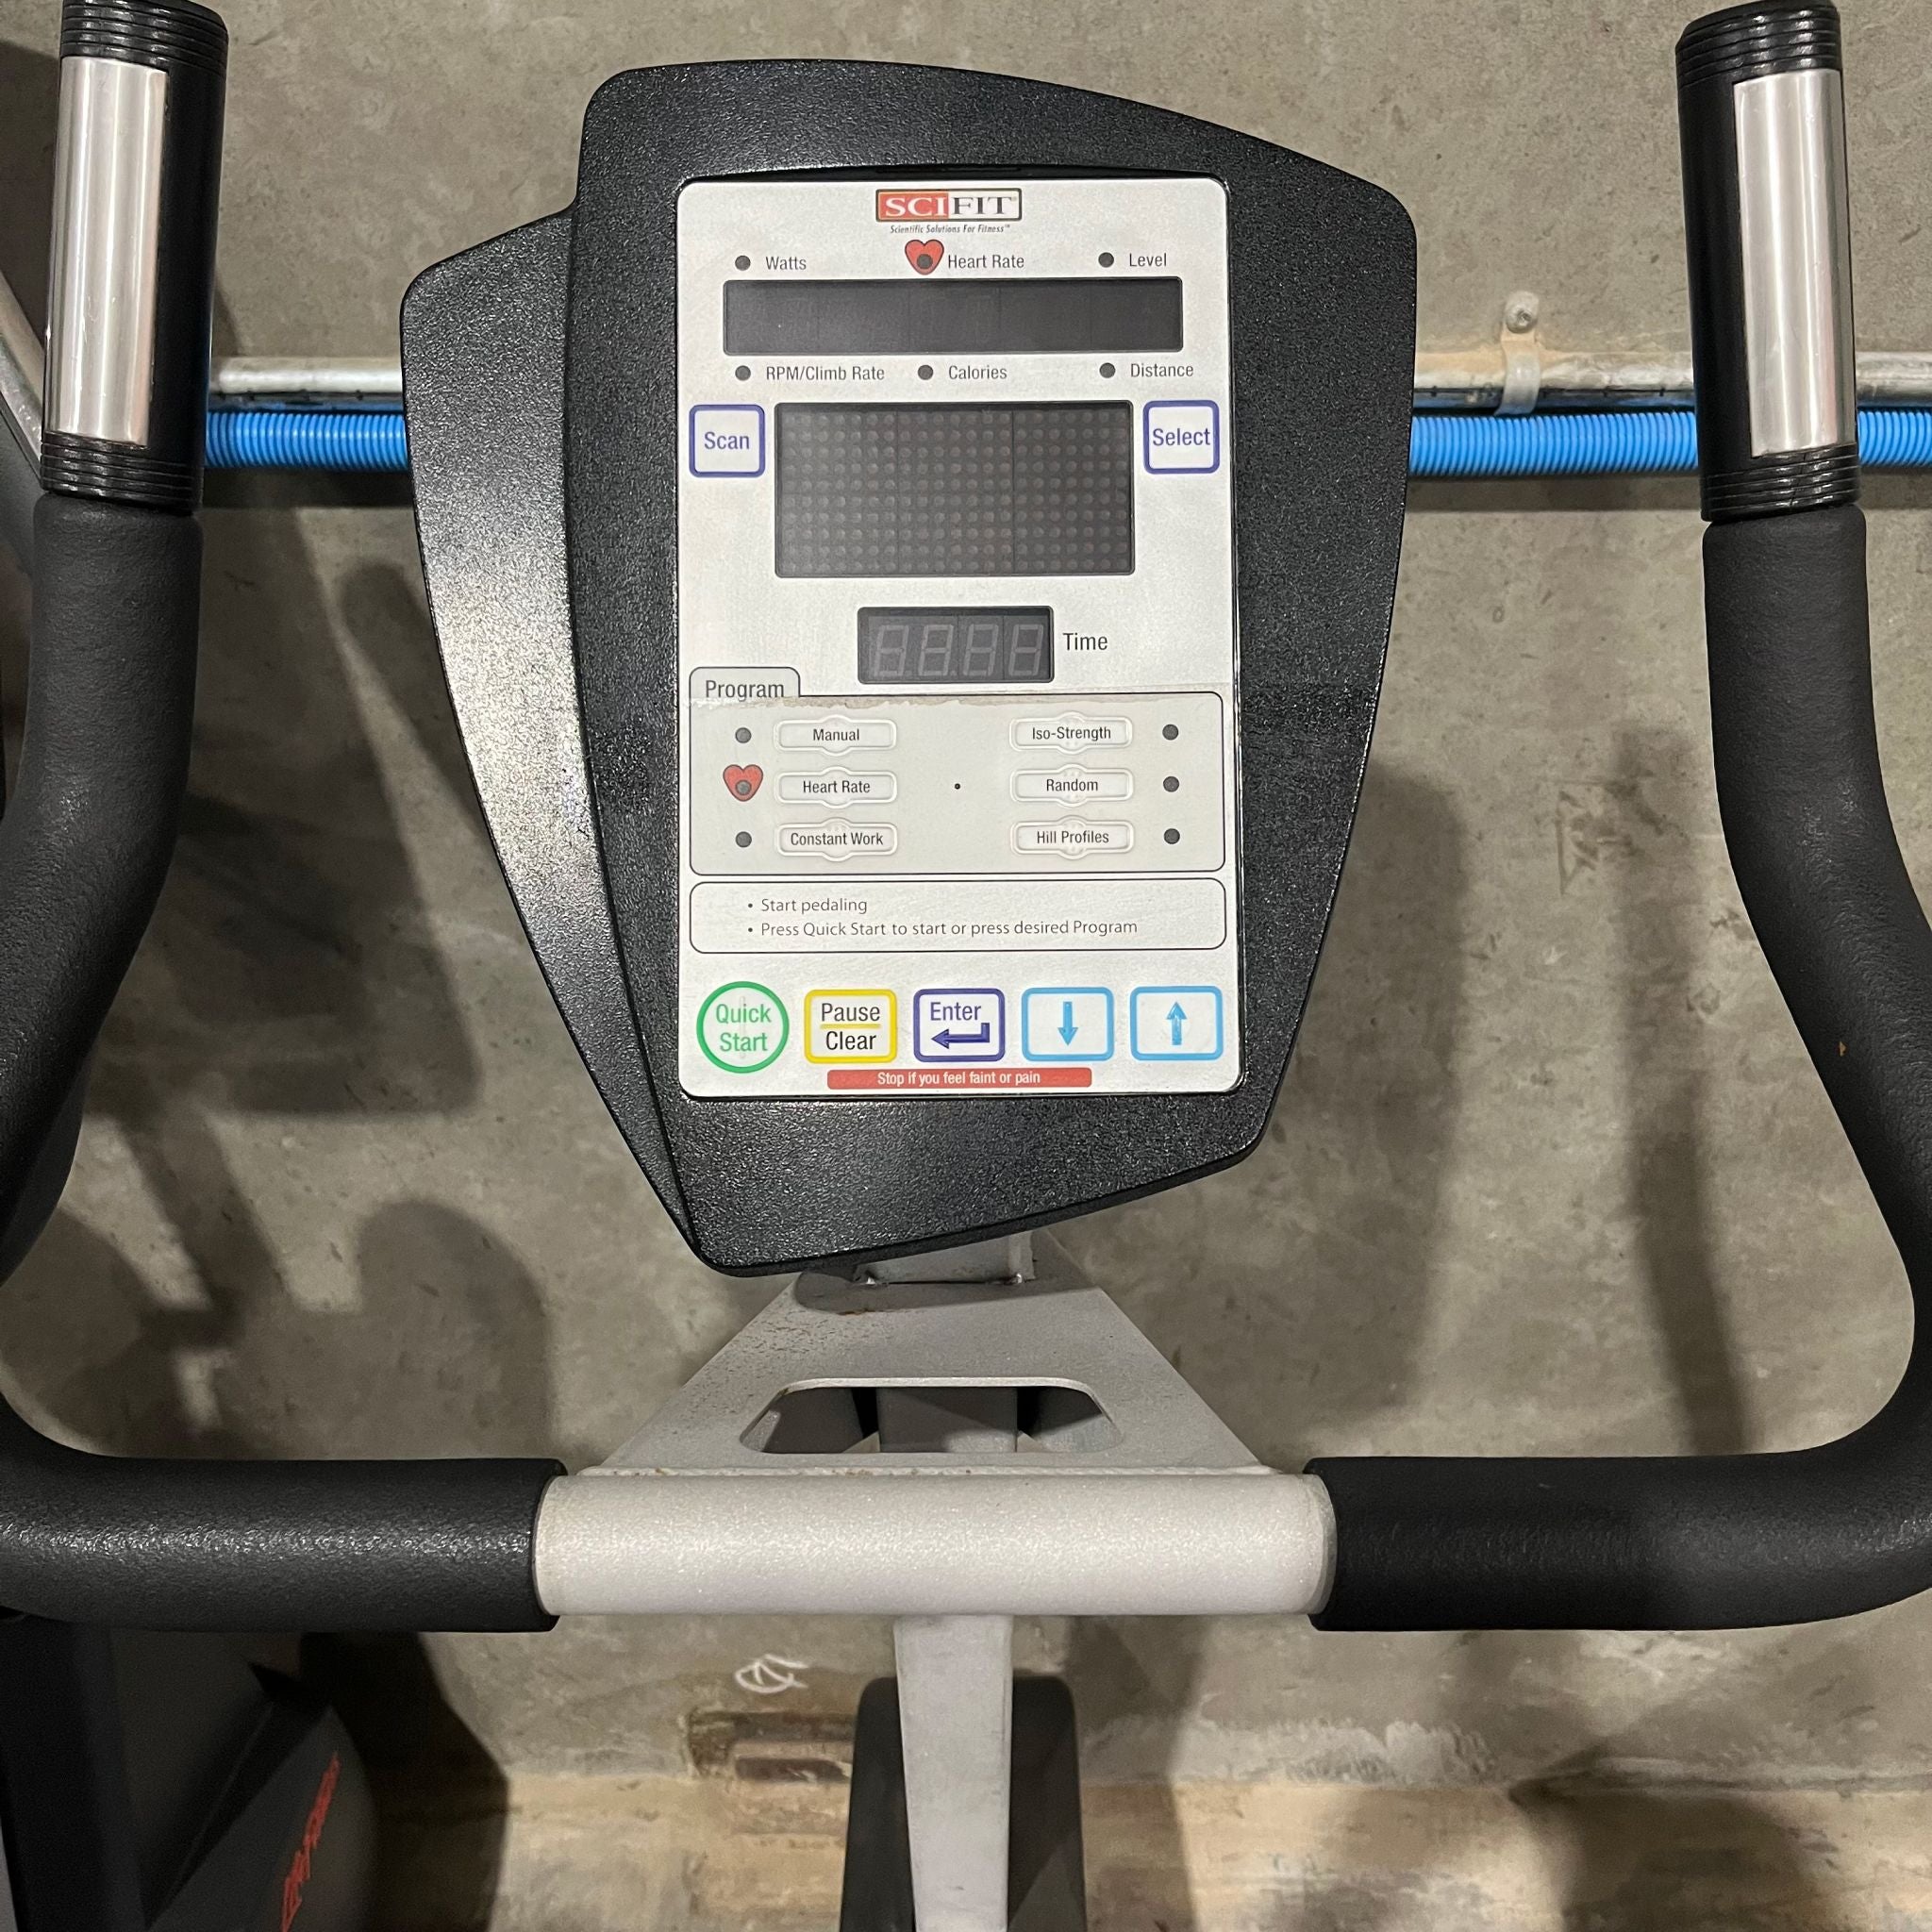 The multi-featured console on the SciFit ISO7000 Upright Bike in Warehouse